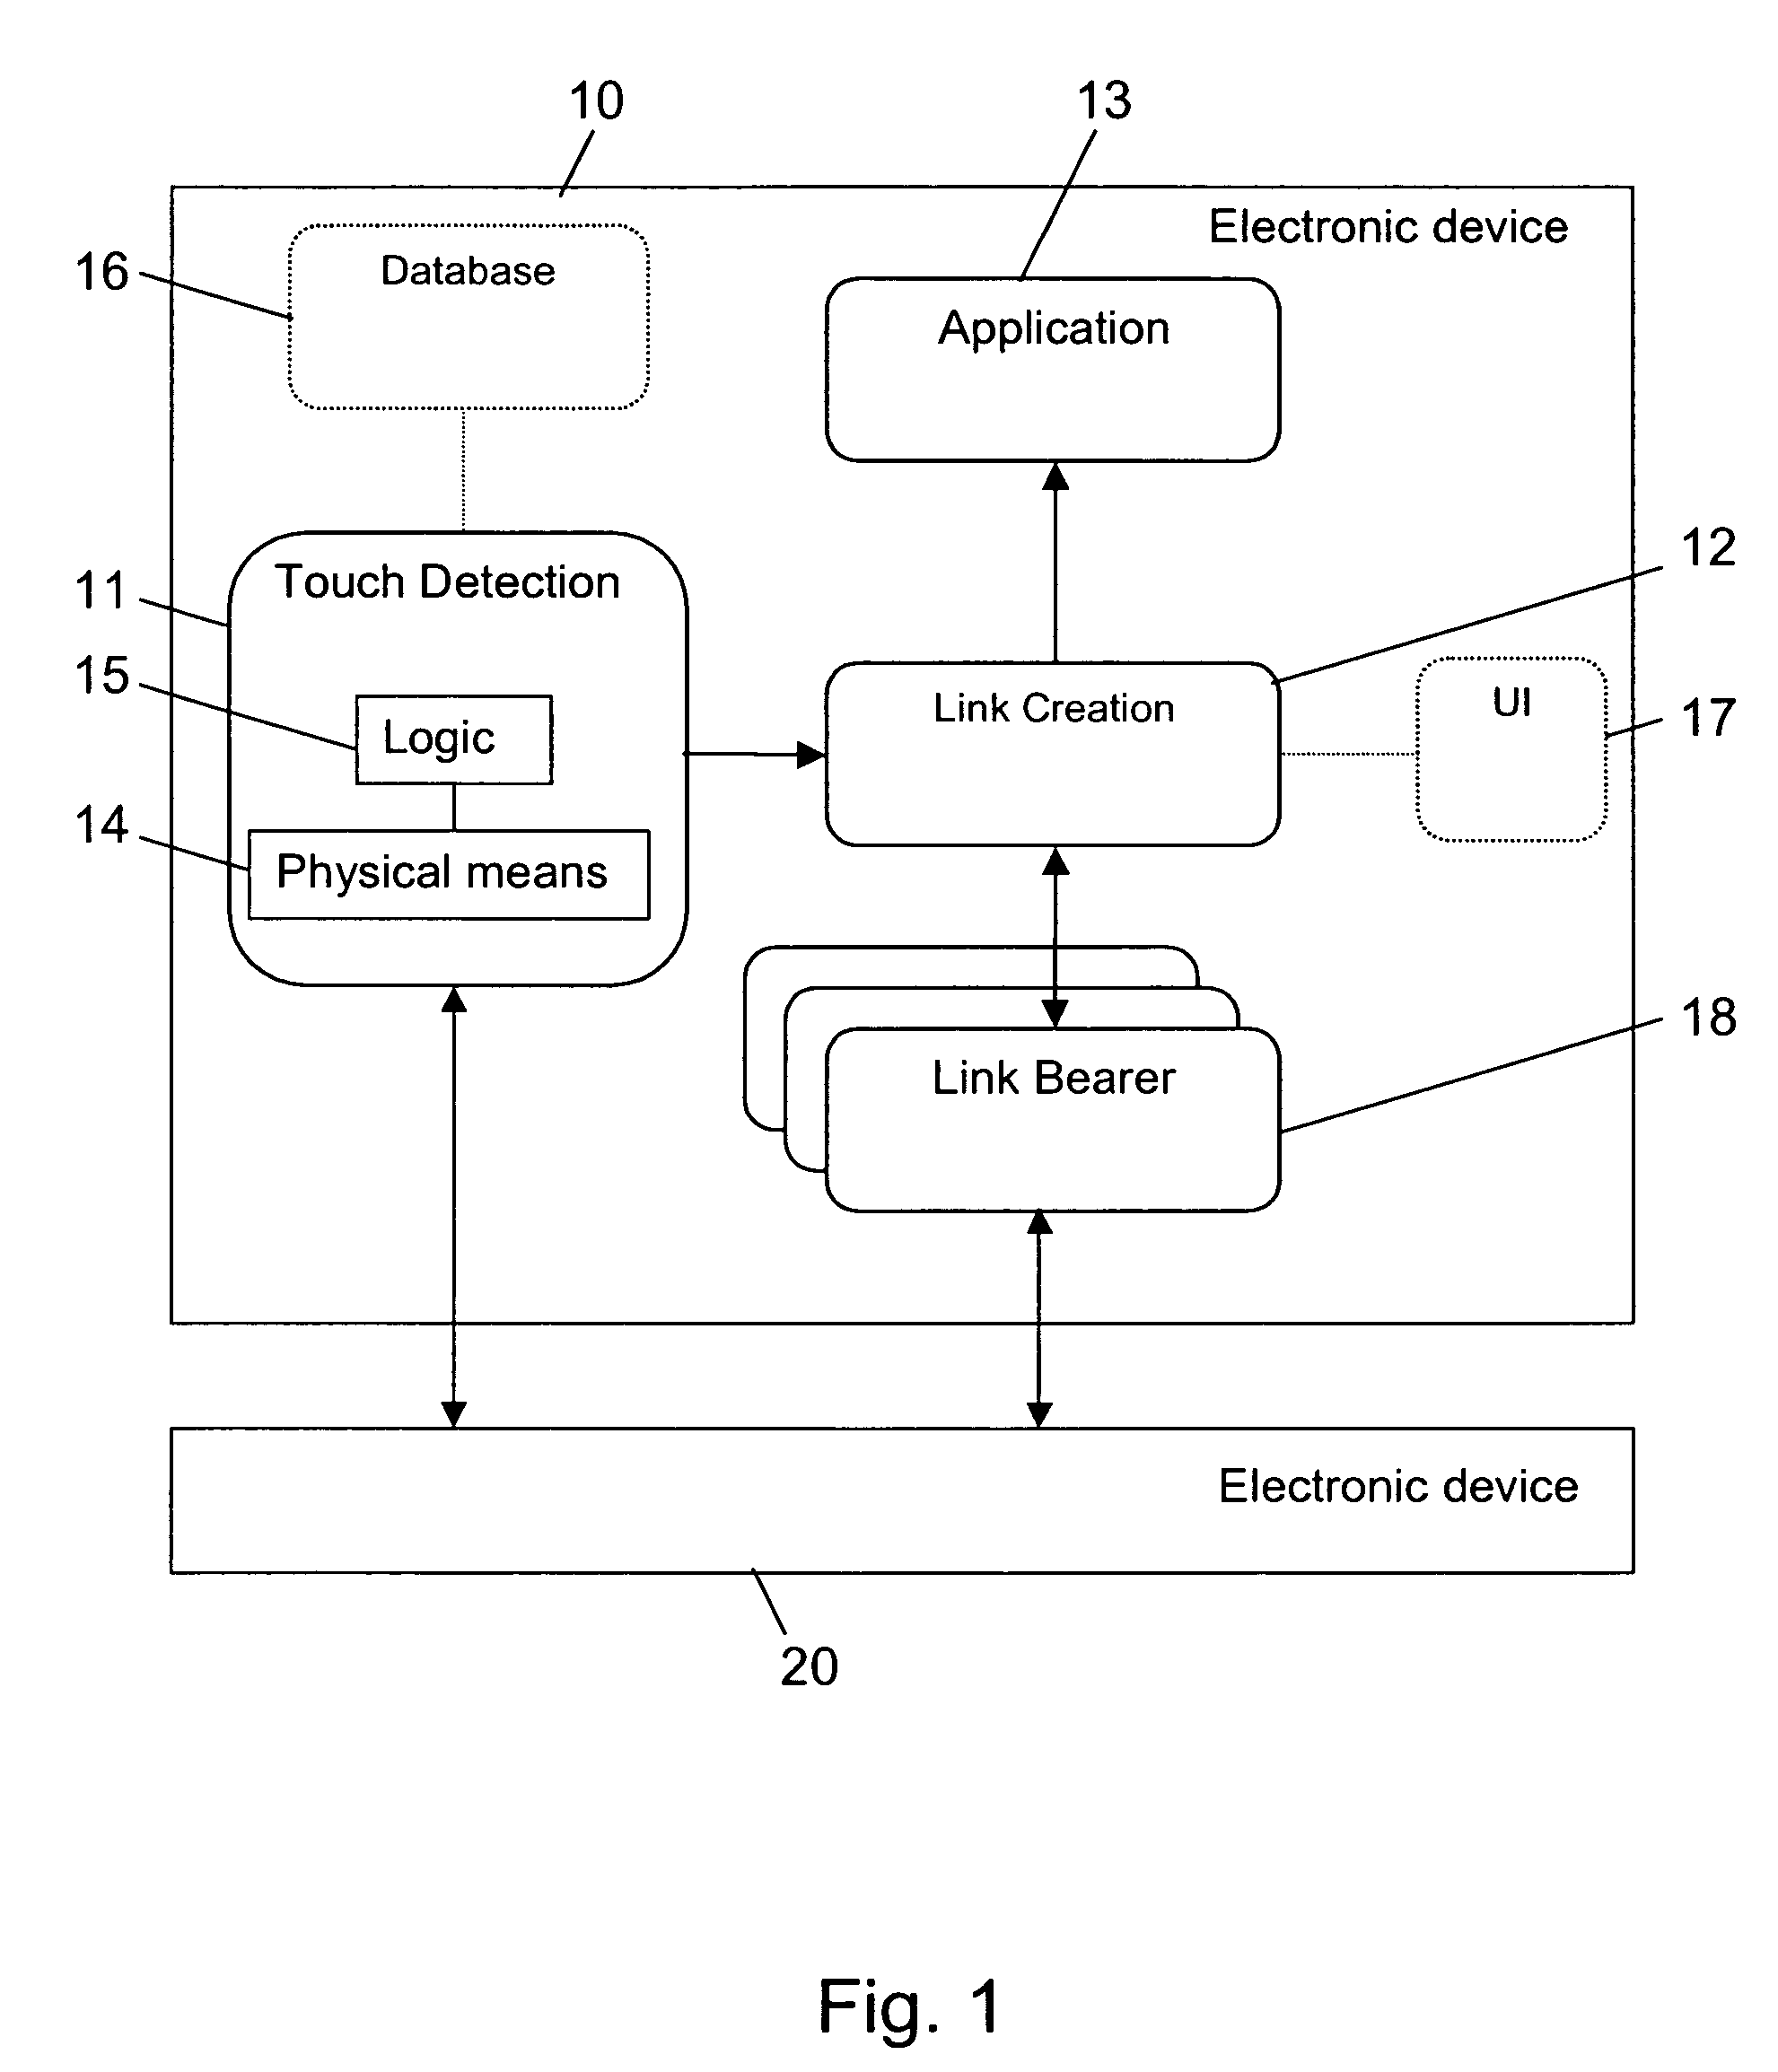 Ad-hoc connection between electronic devices